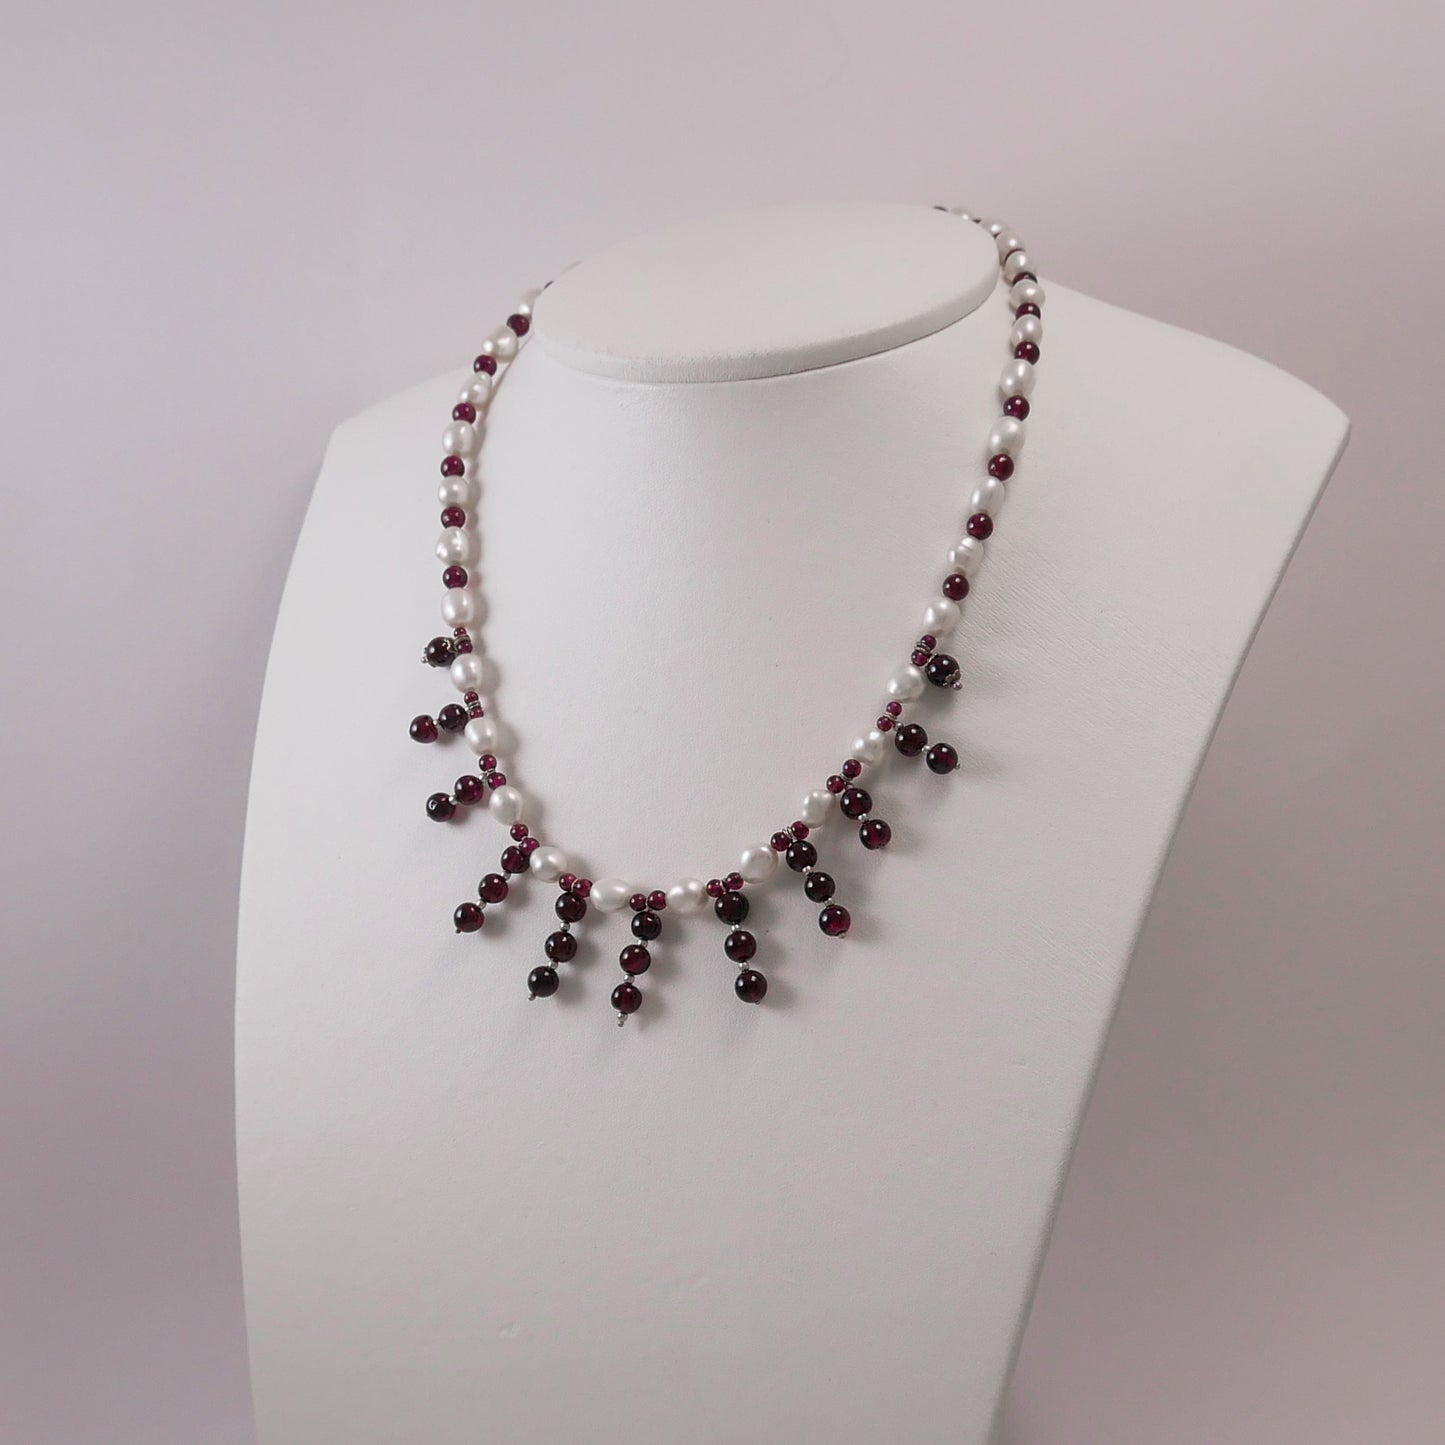 Pearls, Garnets, and Sterling Silver - Katerina Roukouna